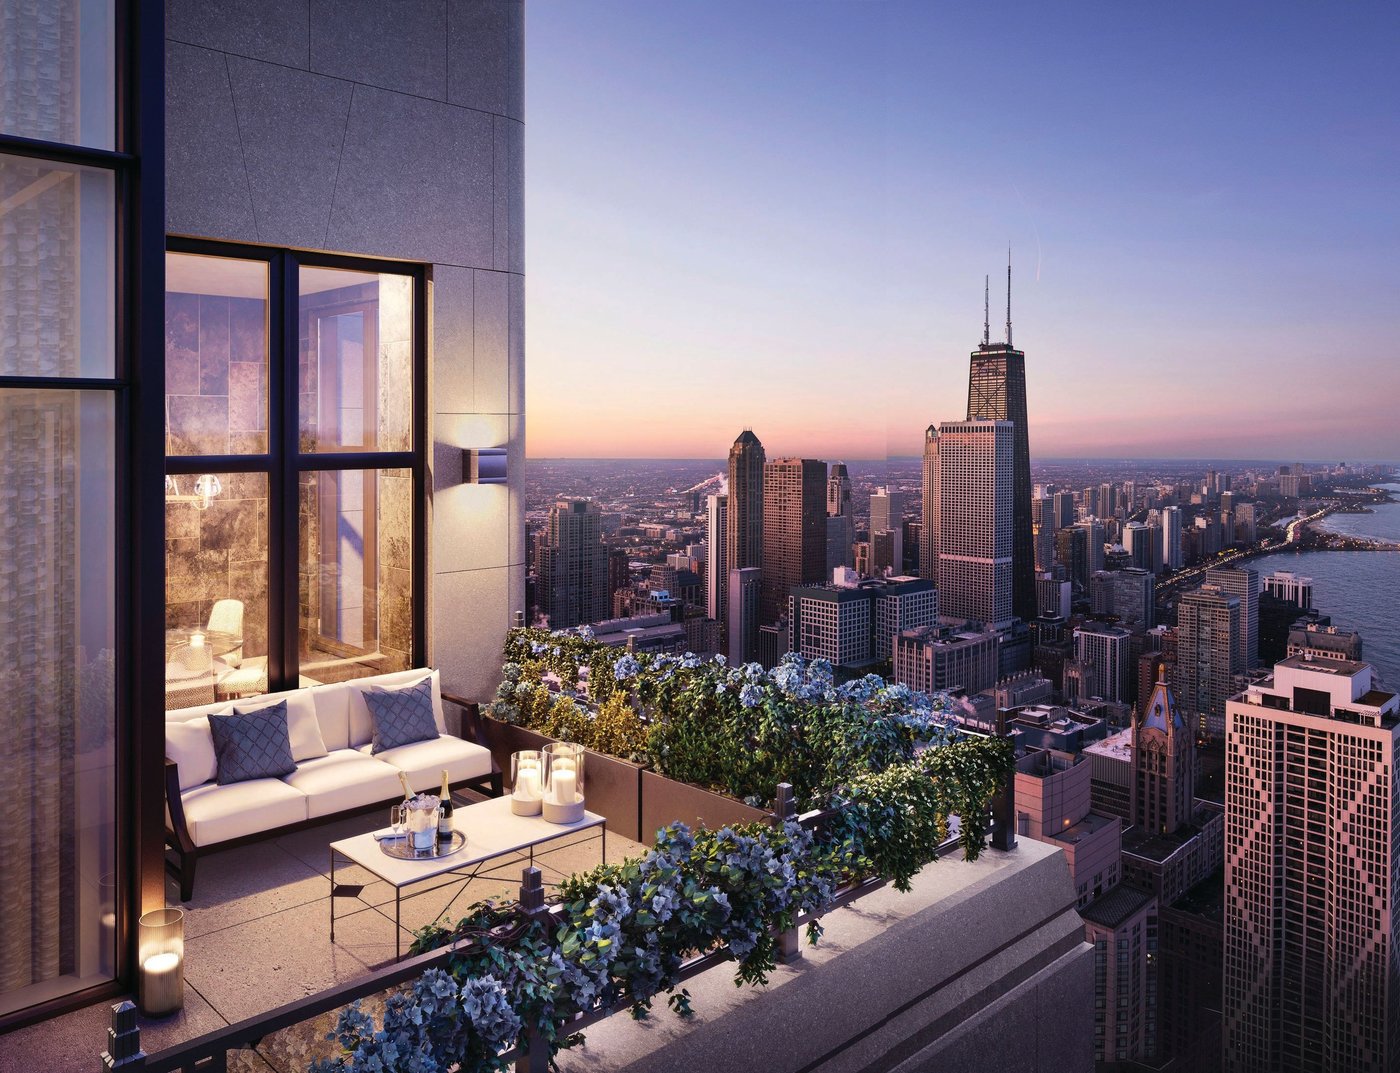 The open-air terrace offers sweeping city and lake views COURTESY OF JAMESON SOTHEBY’S INTERNATIONAL REALTY